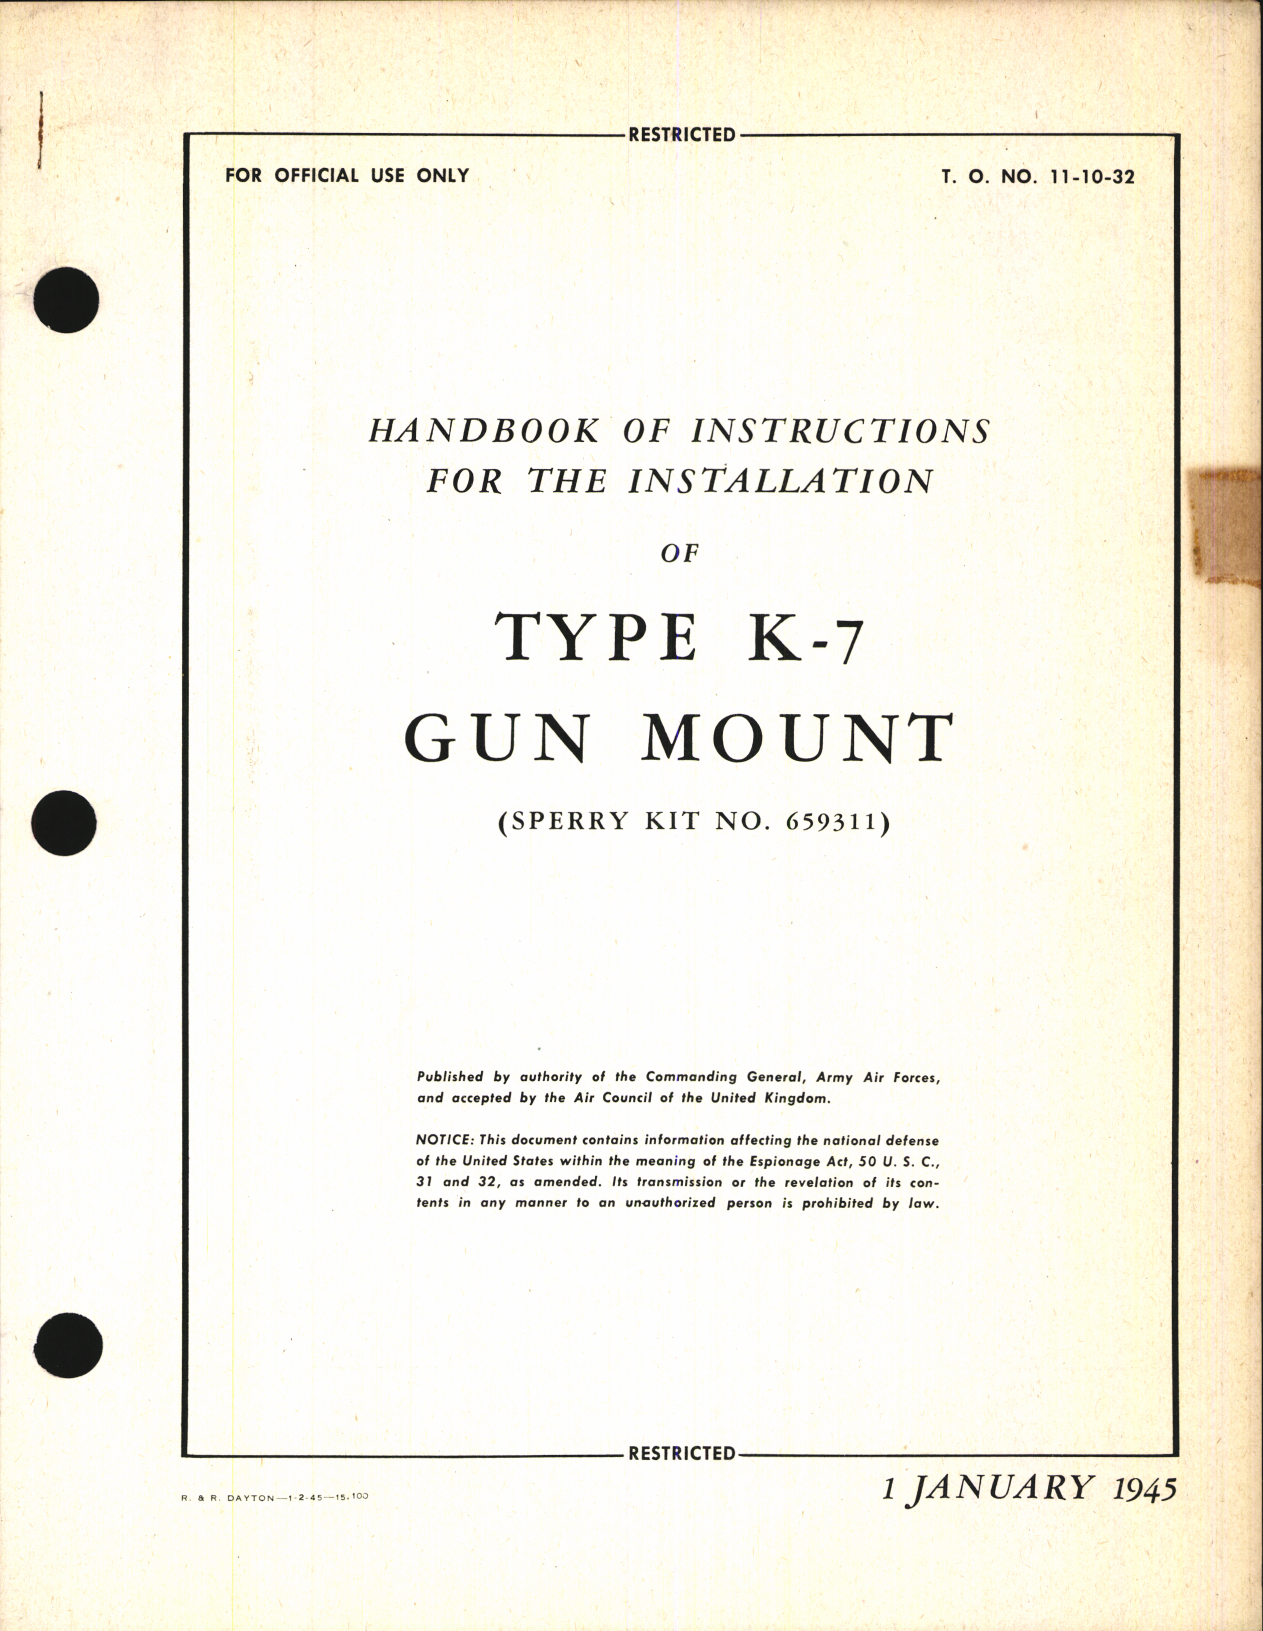 Sample page 1 from AirCorps Library document: Handbook of Instructions for the Installation of Type K-7 Gun Mount